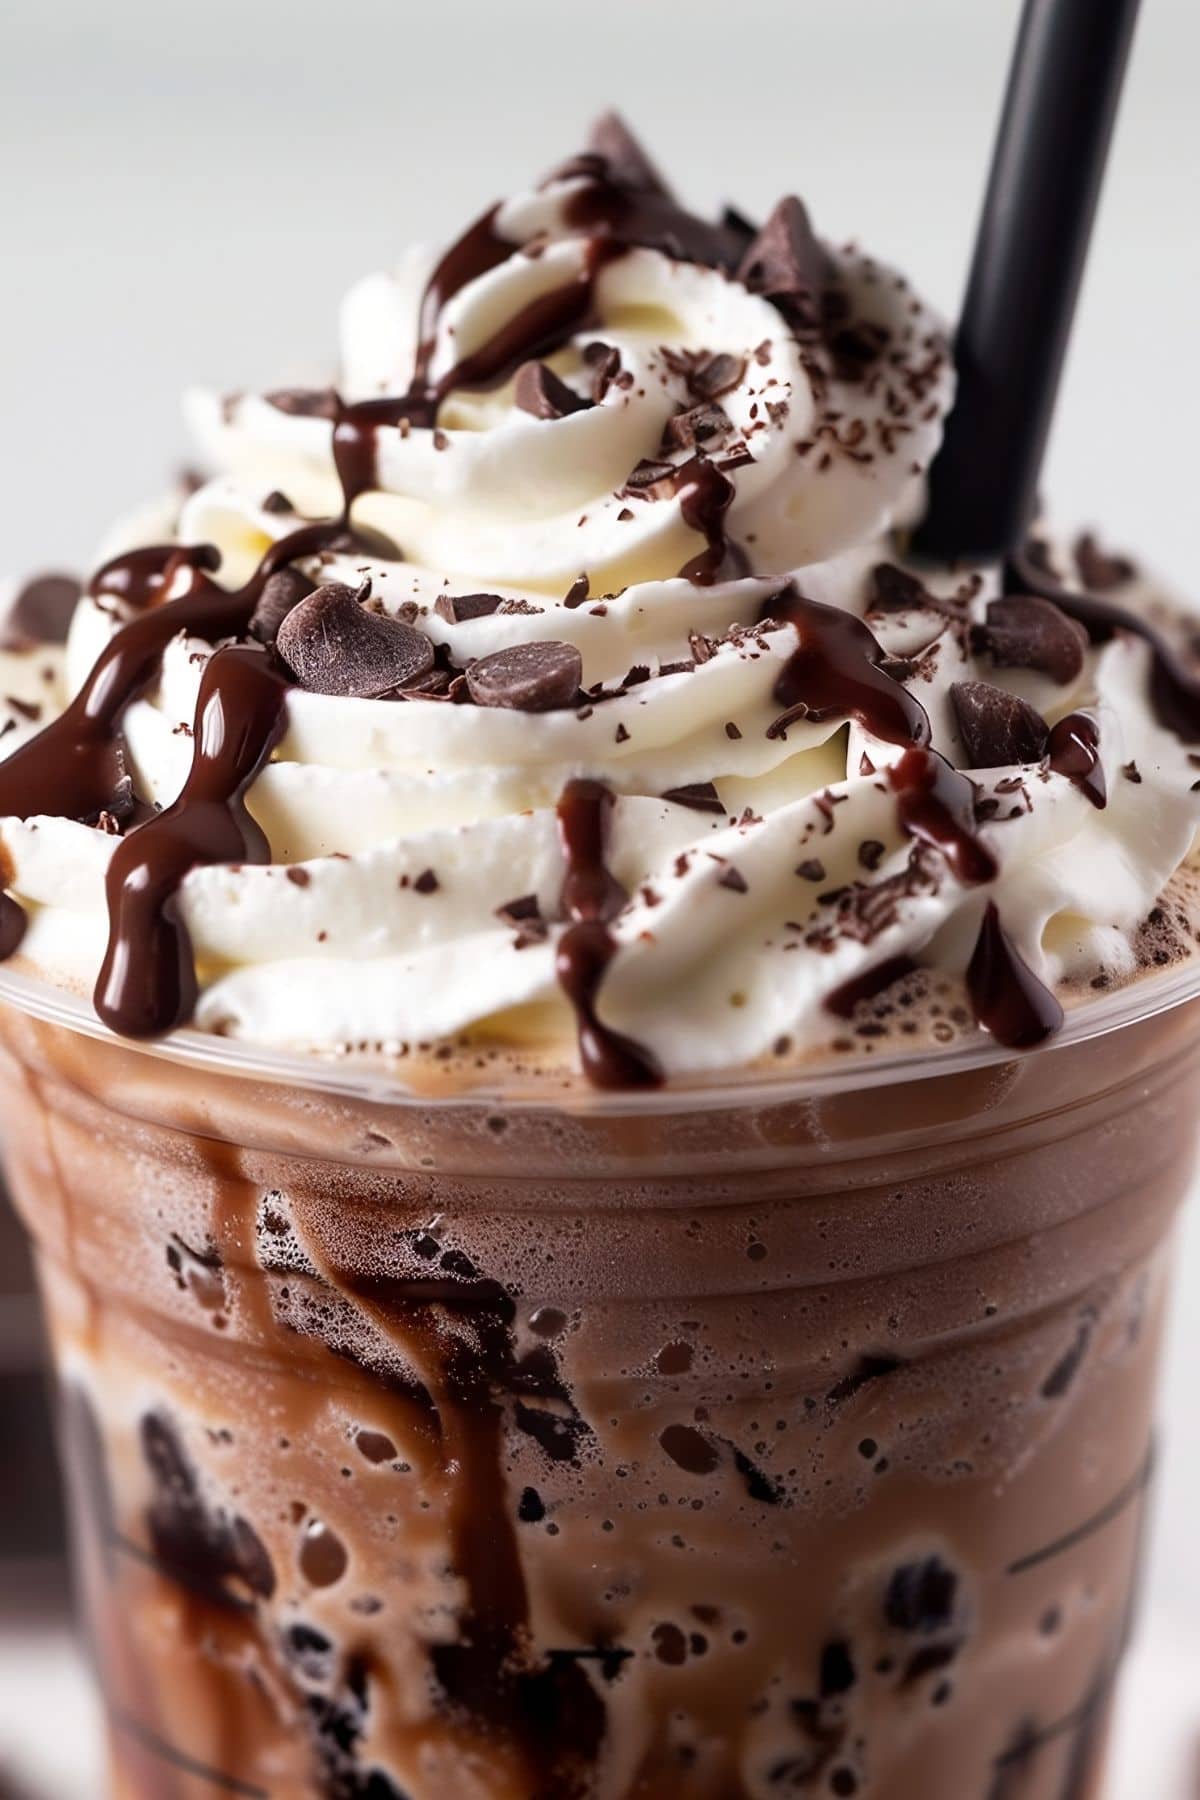 Super Close Up of Starbucks Double Chocolate Chip Frappuccino with Whipped Cream, Chocolate Chips, Chocolate Sauce Drizzle, and Chocolate Shavings